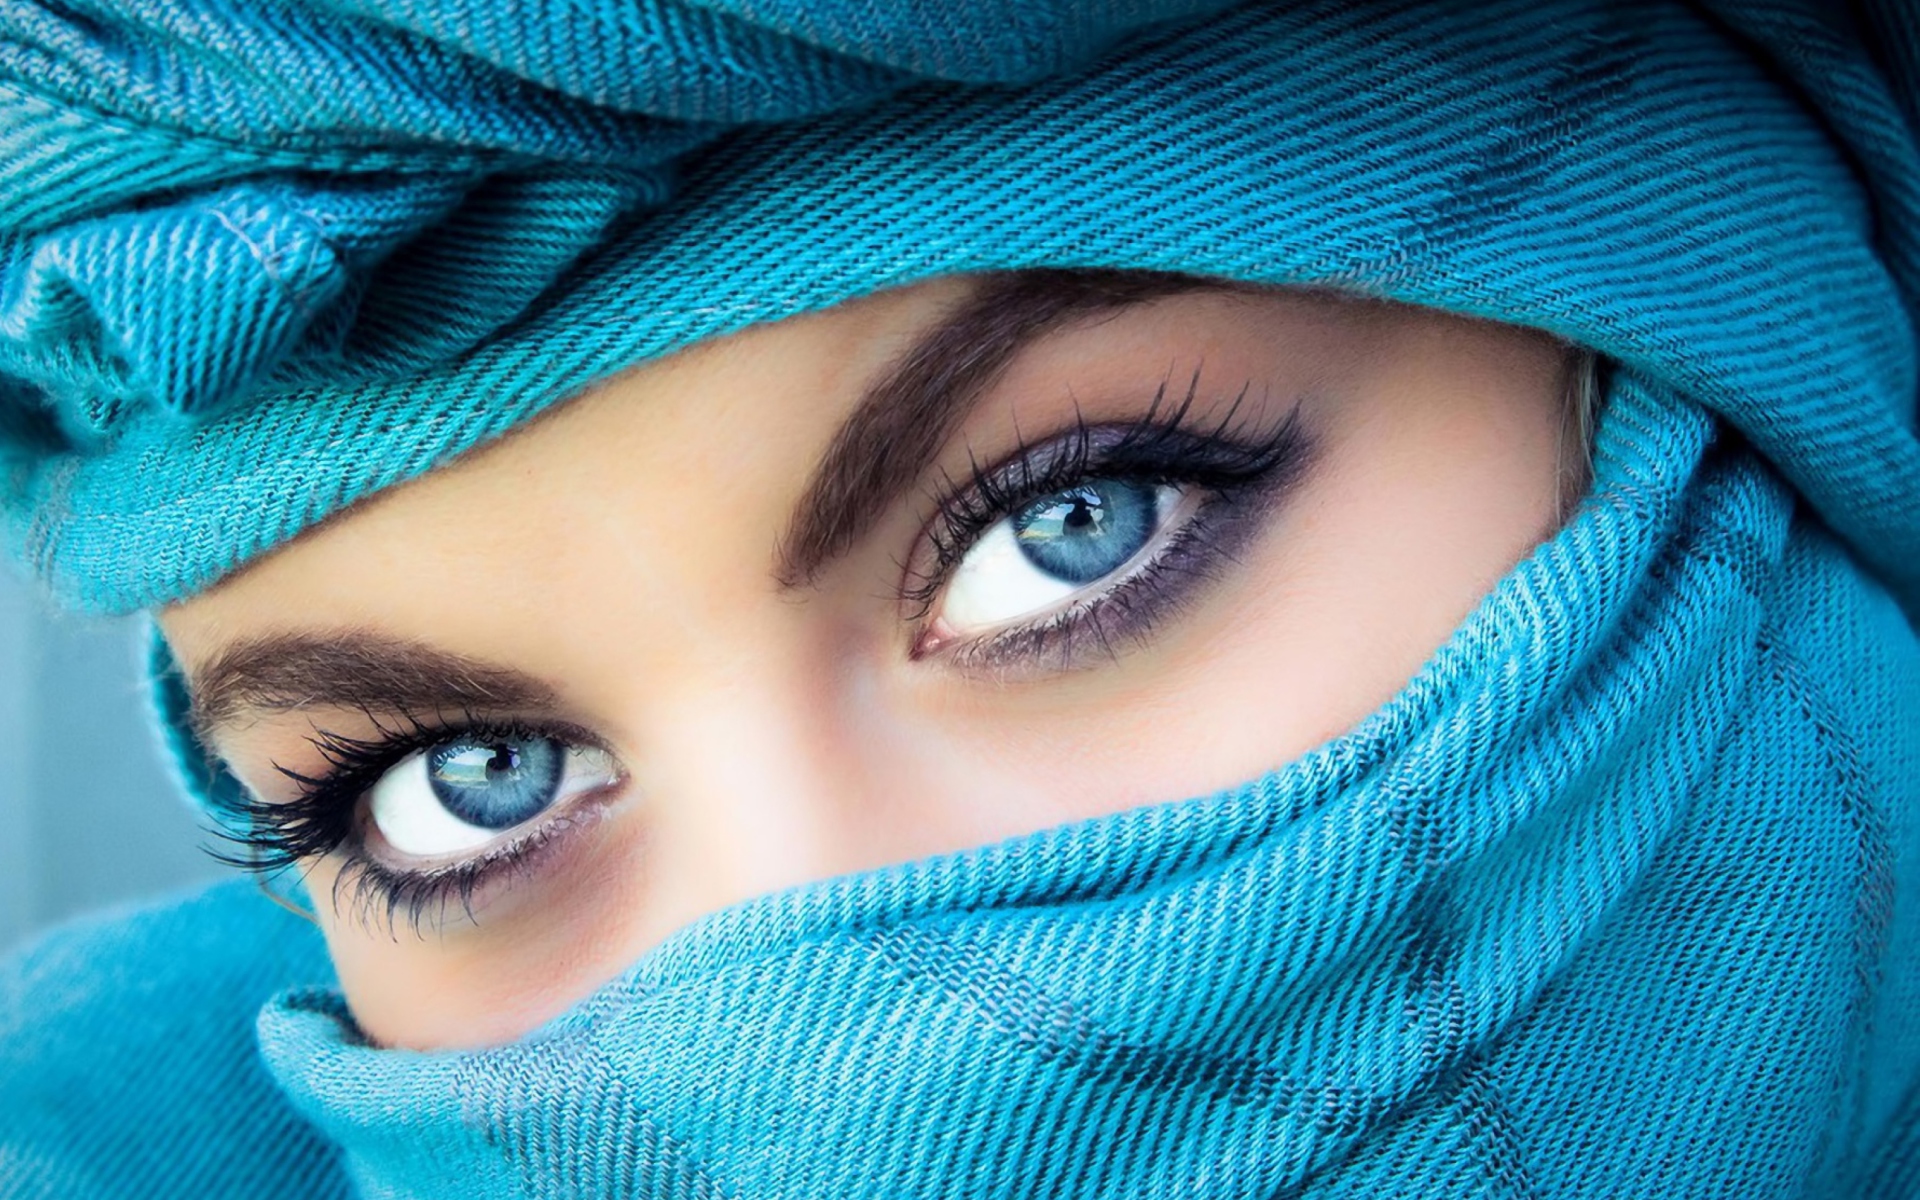 Pretty Blue Eyes - Image Abyss.